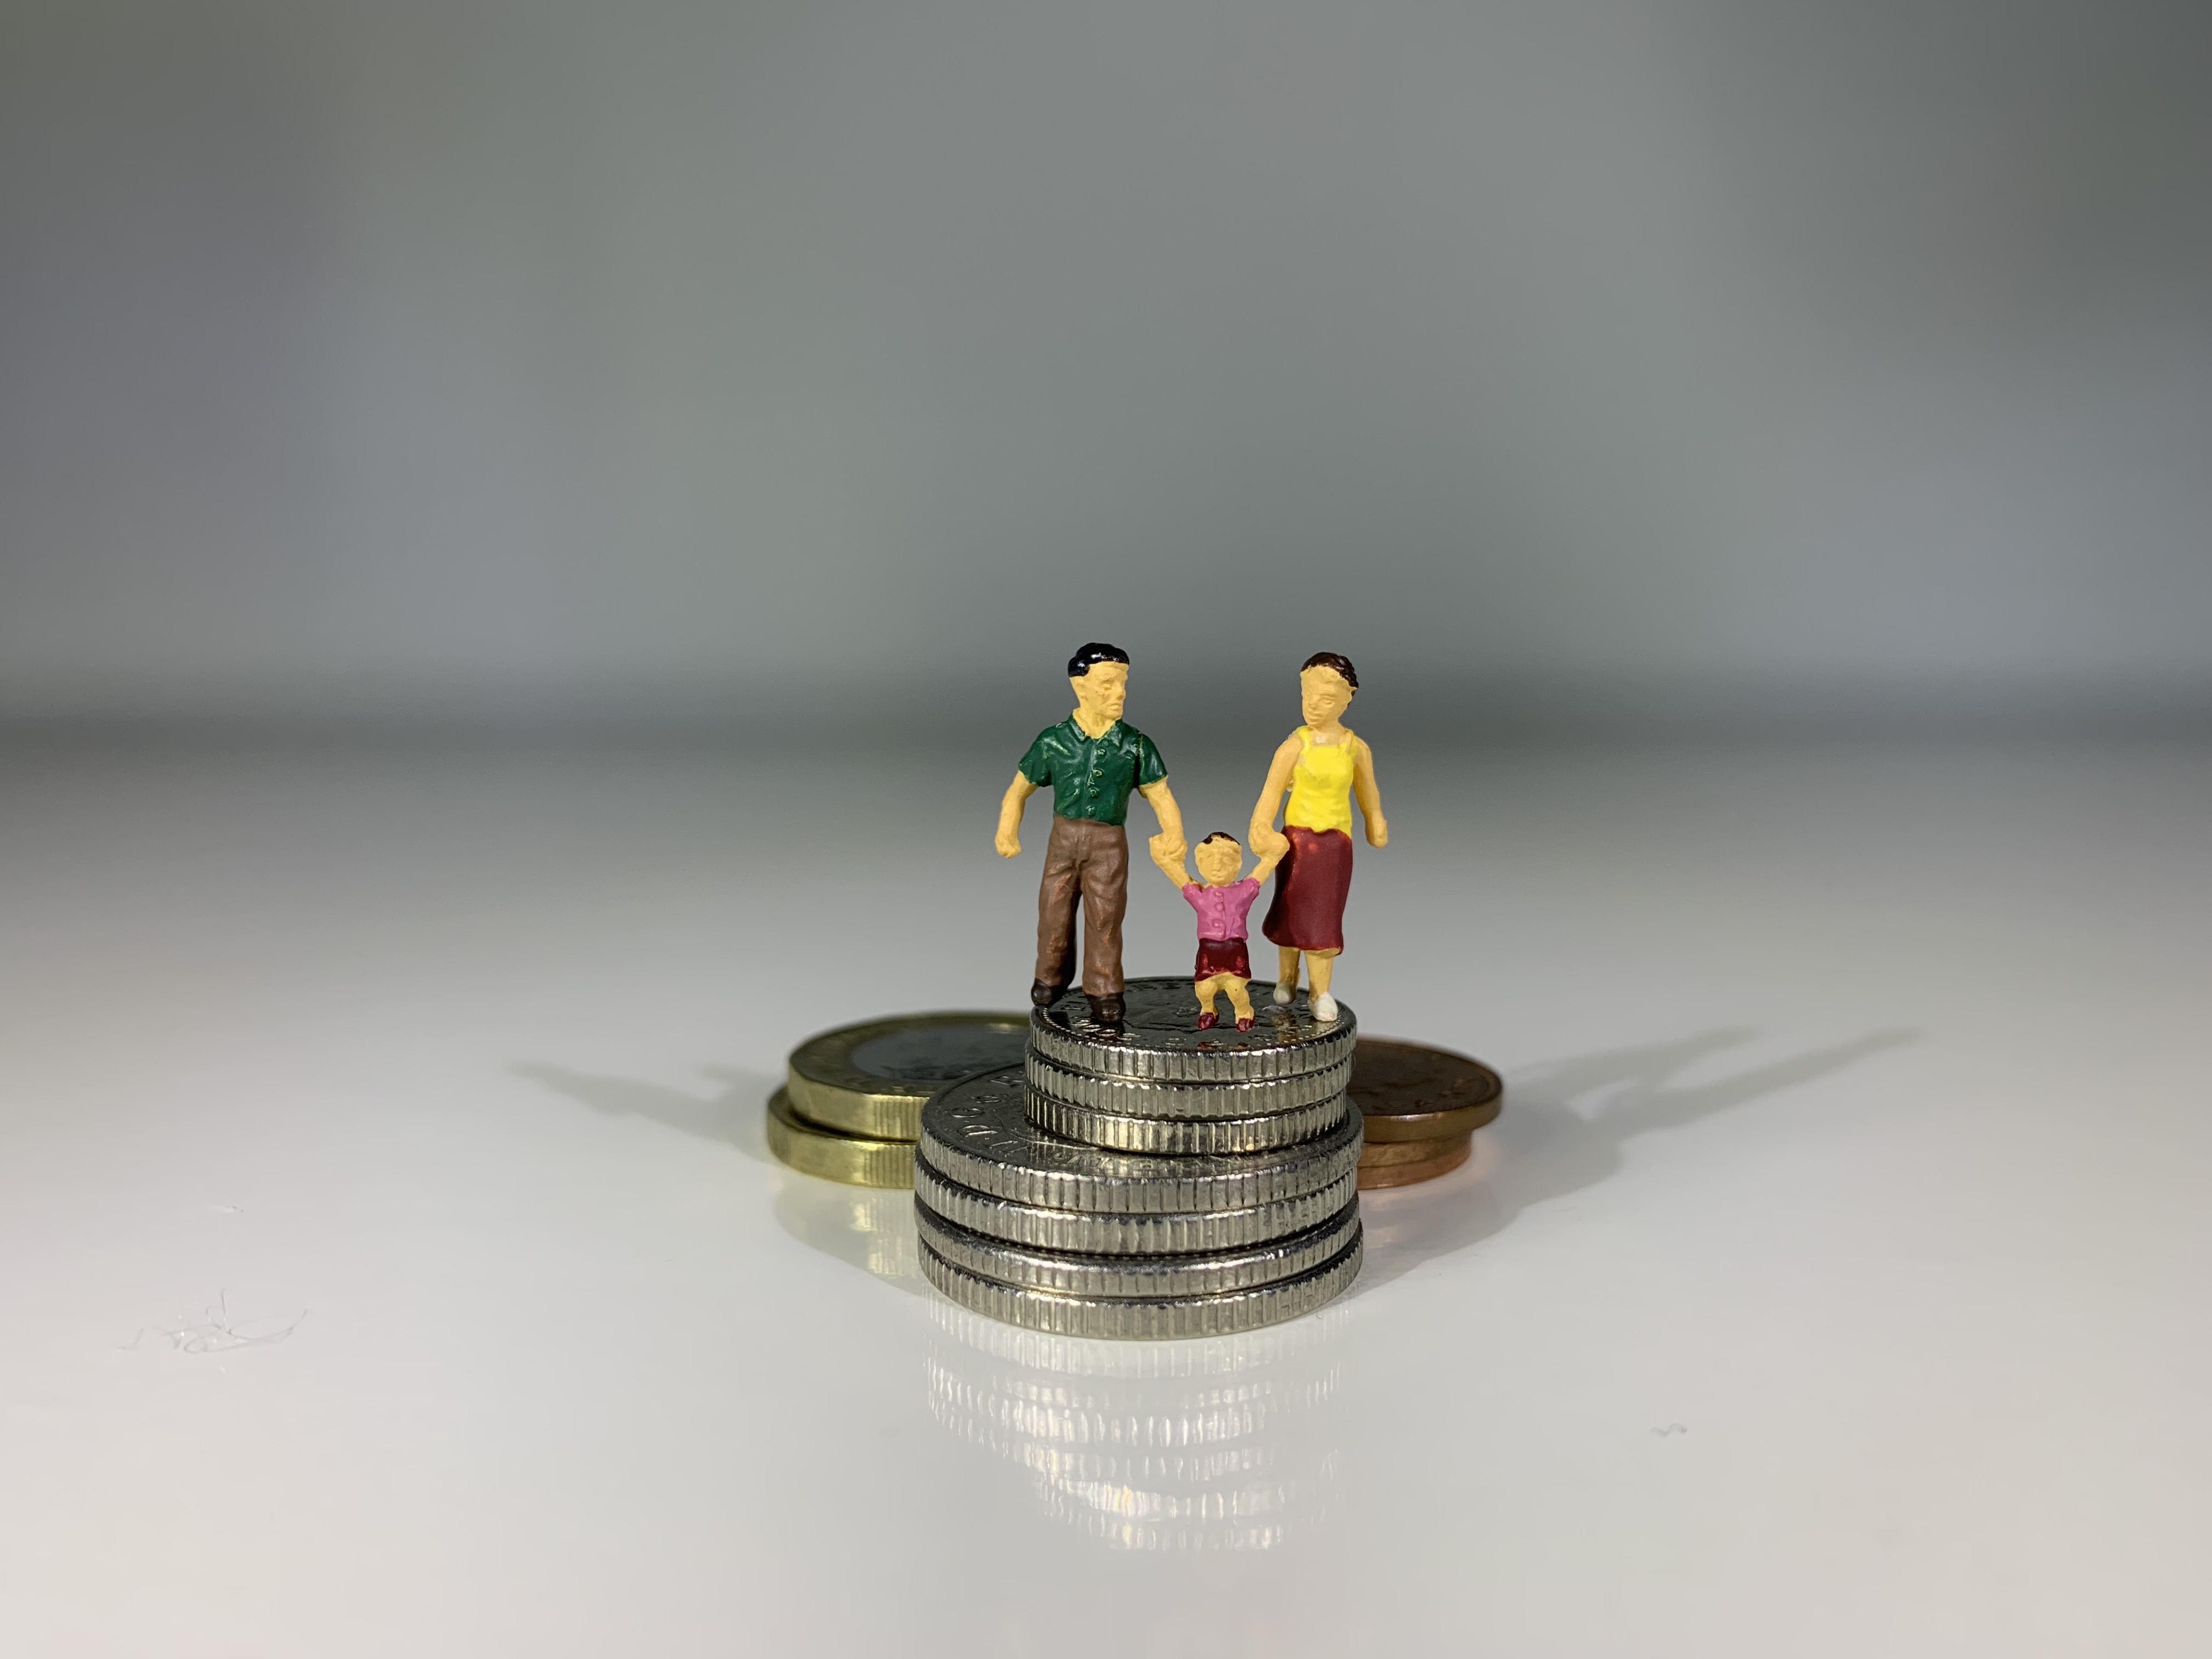 Family standing on coins